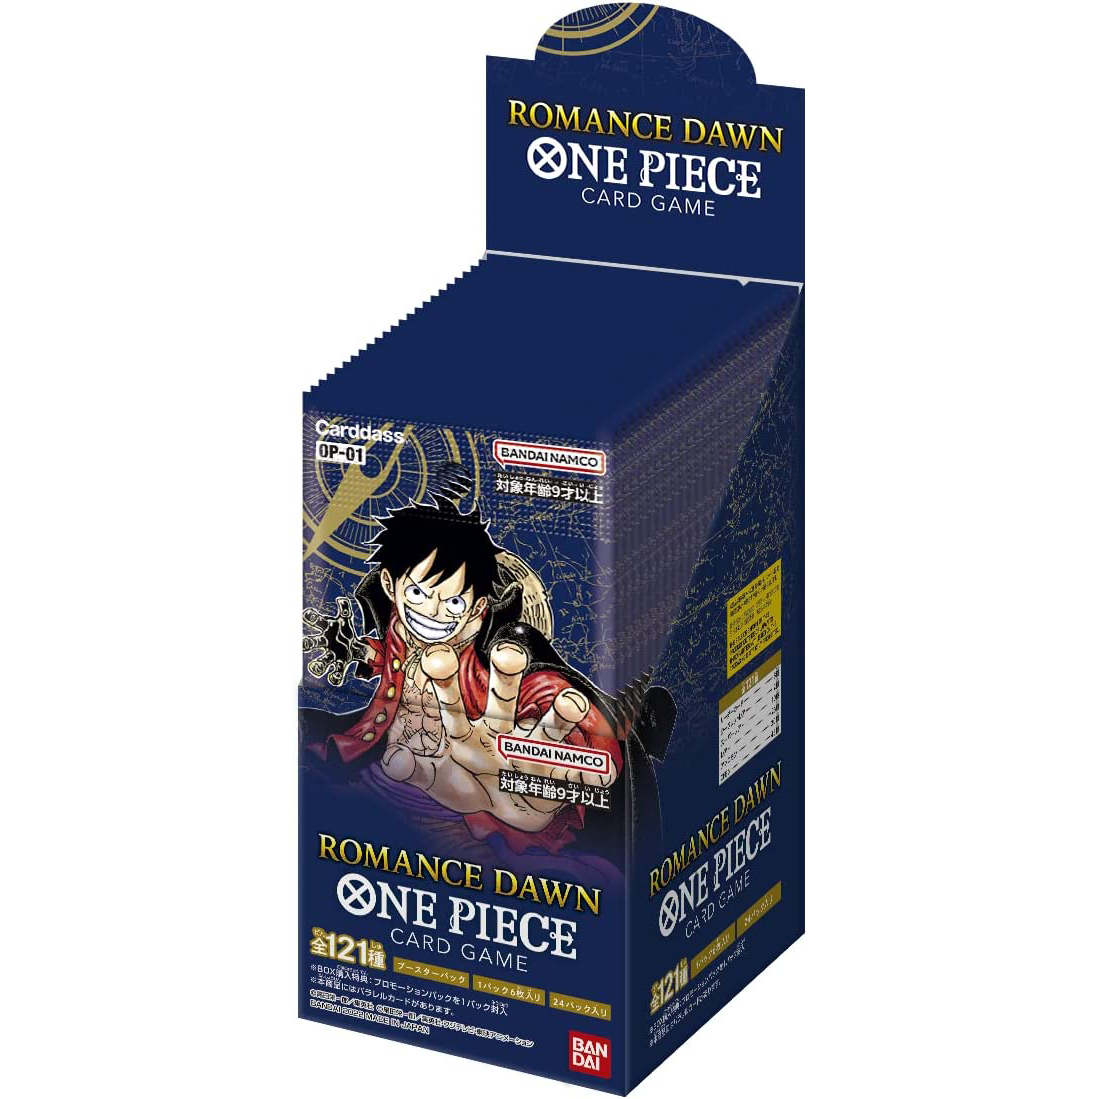 [OP-01] ONE PIECE CARD GAME Booster Pack ｢ROMANCE DAWN｣ Box